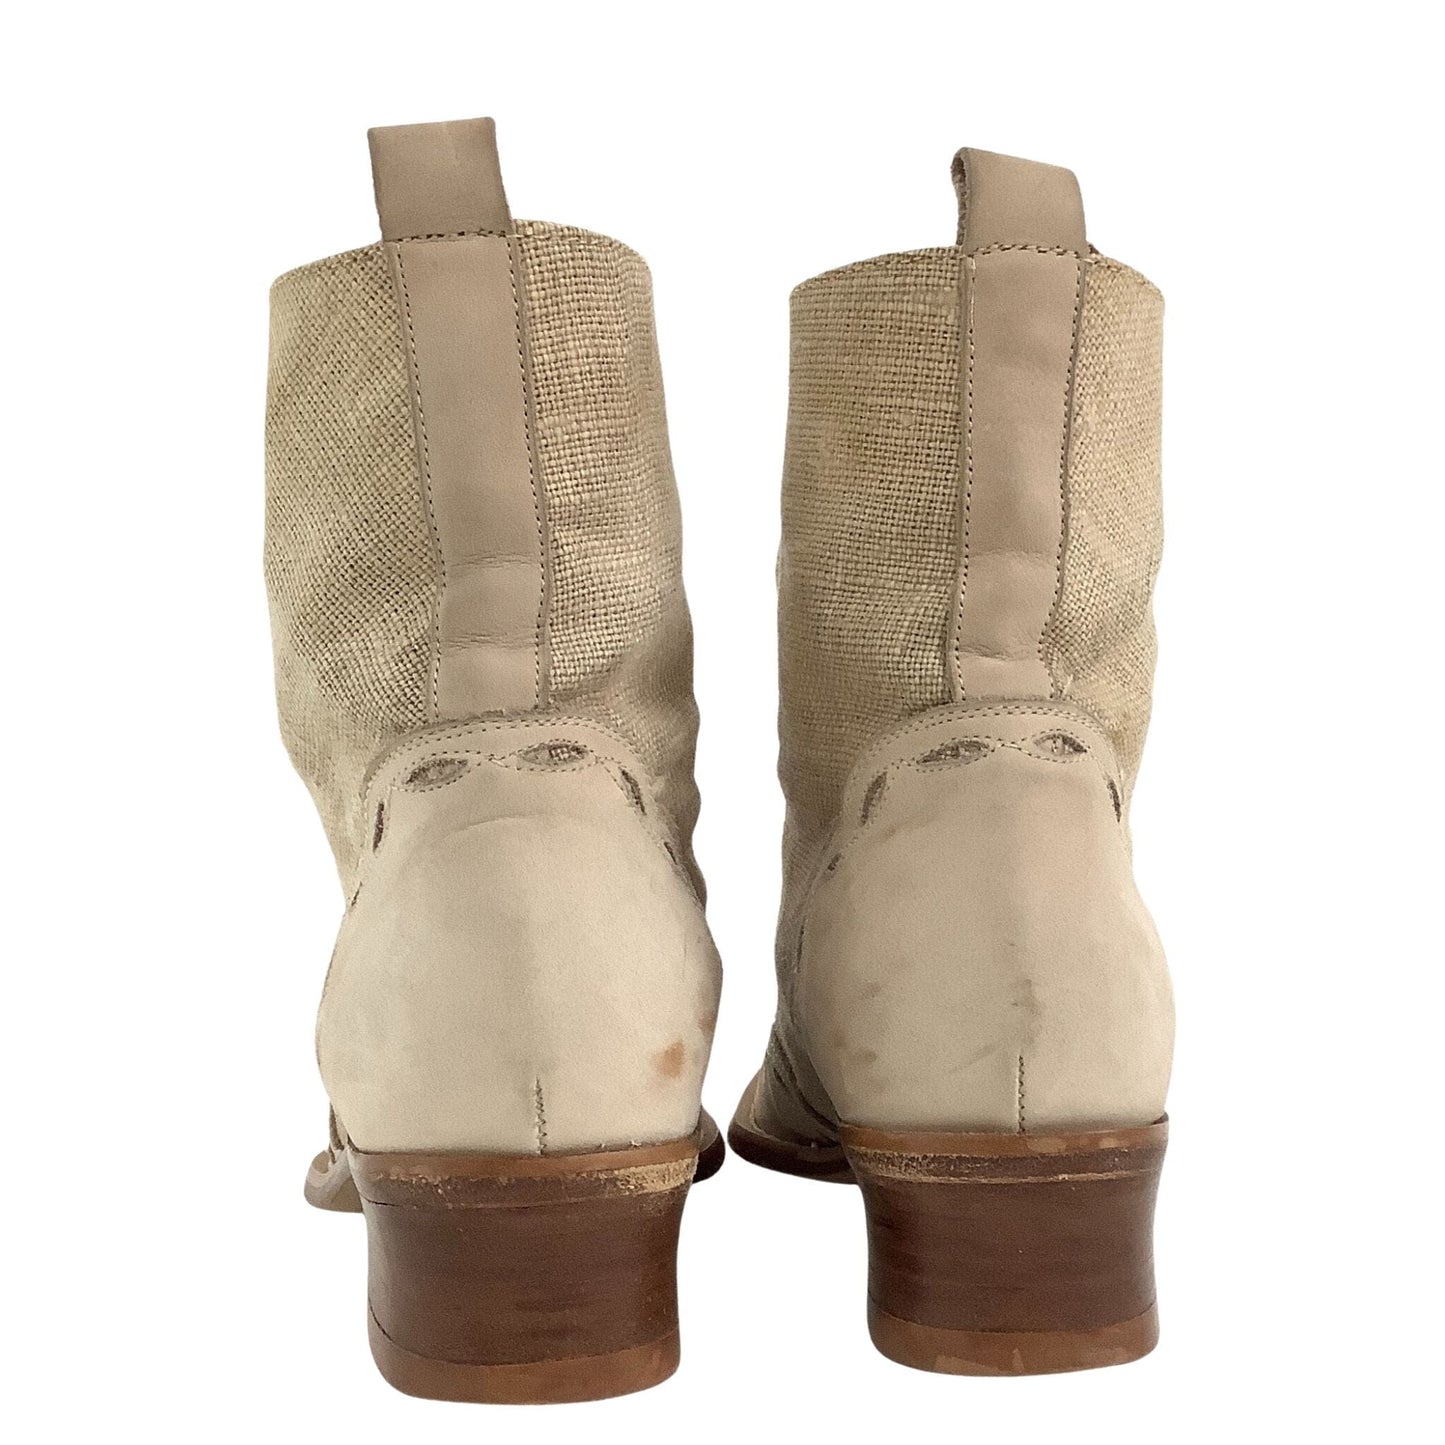 Guess Lace-up Booties 7.5 / Beige / Vintage 1990s